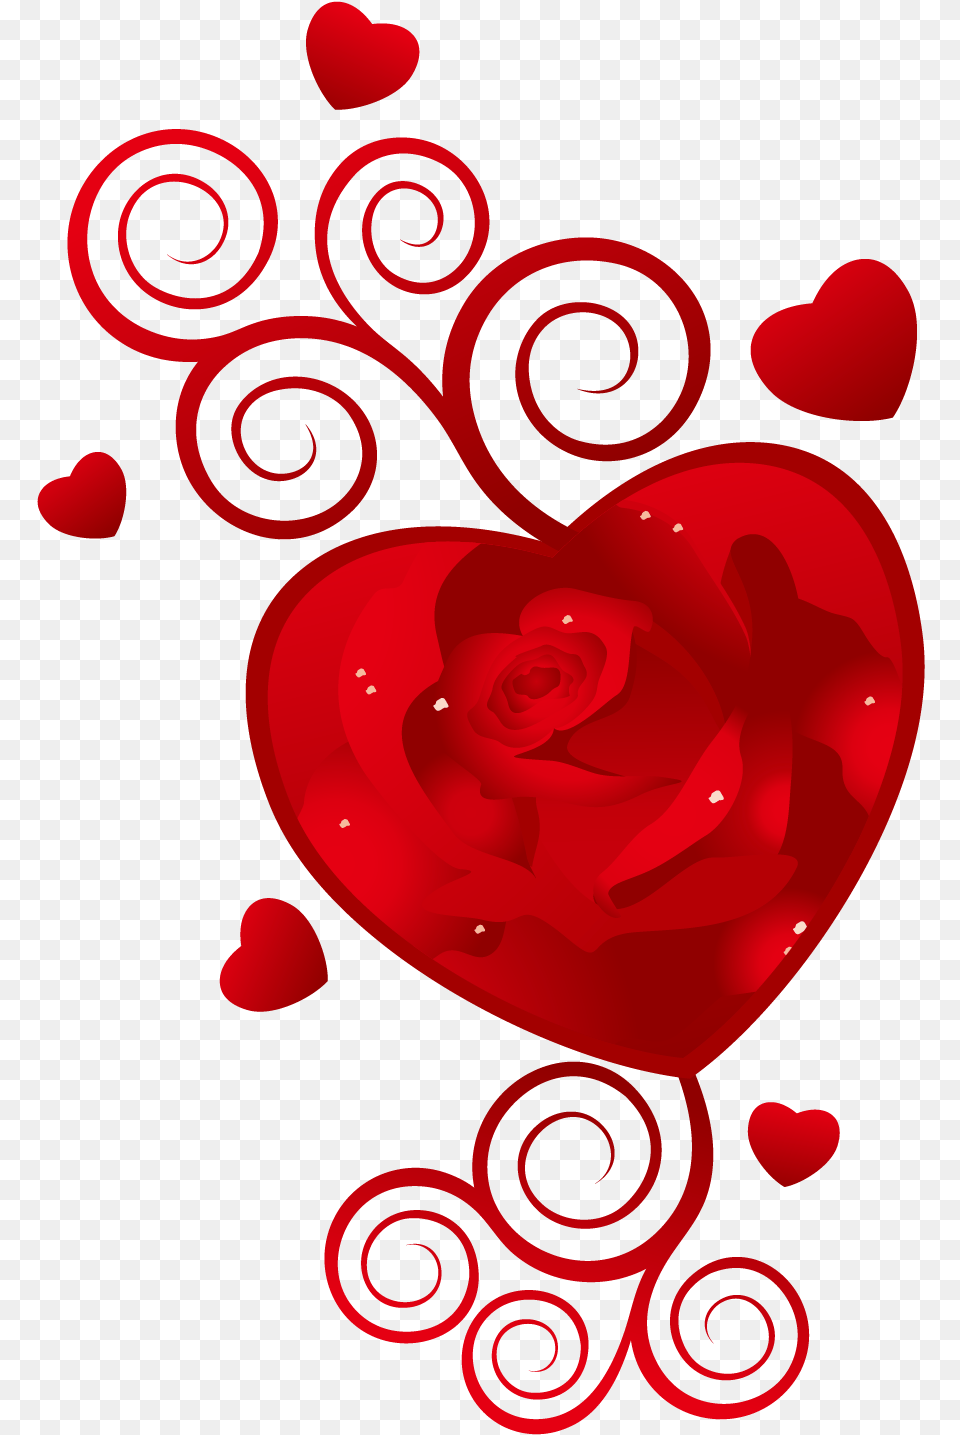 Download Heart February 14 Wish Valentines Vector Rose Good Morning Happy Valentine Day 2020, Flower, Plant, Art, Graphics Png Image